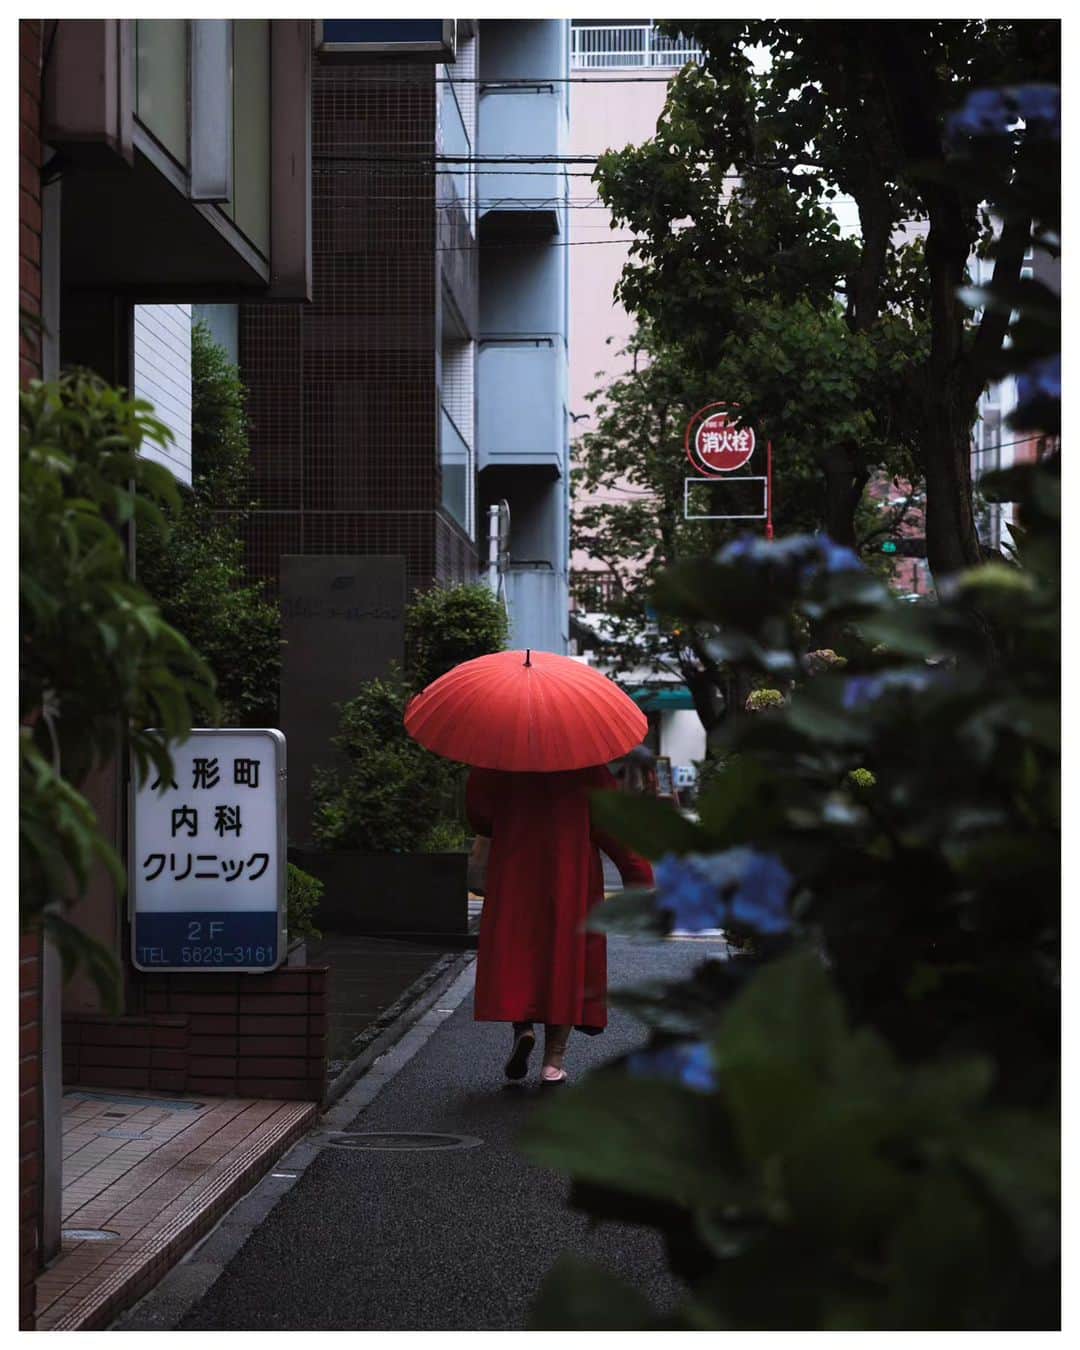 Takashi Yasuiのインスタグラム：「Tokyo ☔ May 2023  #USETSU #TakashiYasui #SPiCollective #filmic_streets #ASPfeatures #photocinematica #STREETGRAMMERS #street_storytelling #bcncollective #ifyouleave #sublimestreet #streetfinder #timeless_streets #MadeWithLightroom #worldviewmag #hellofrom #reco_ig」